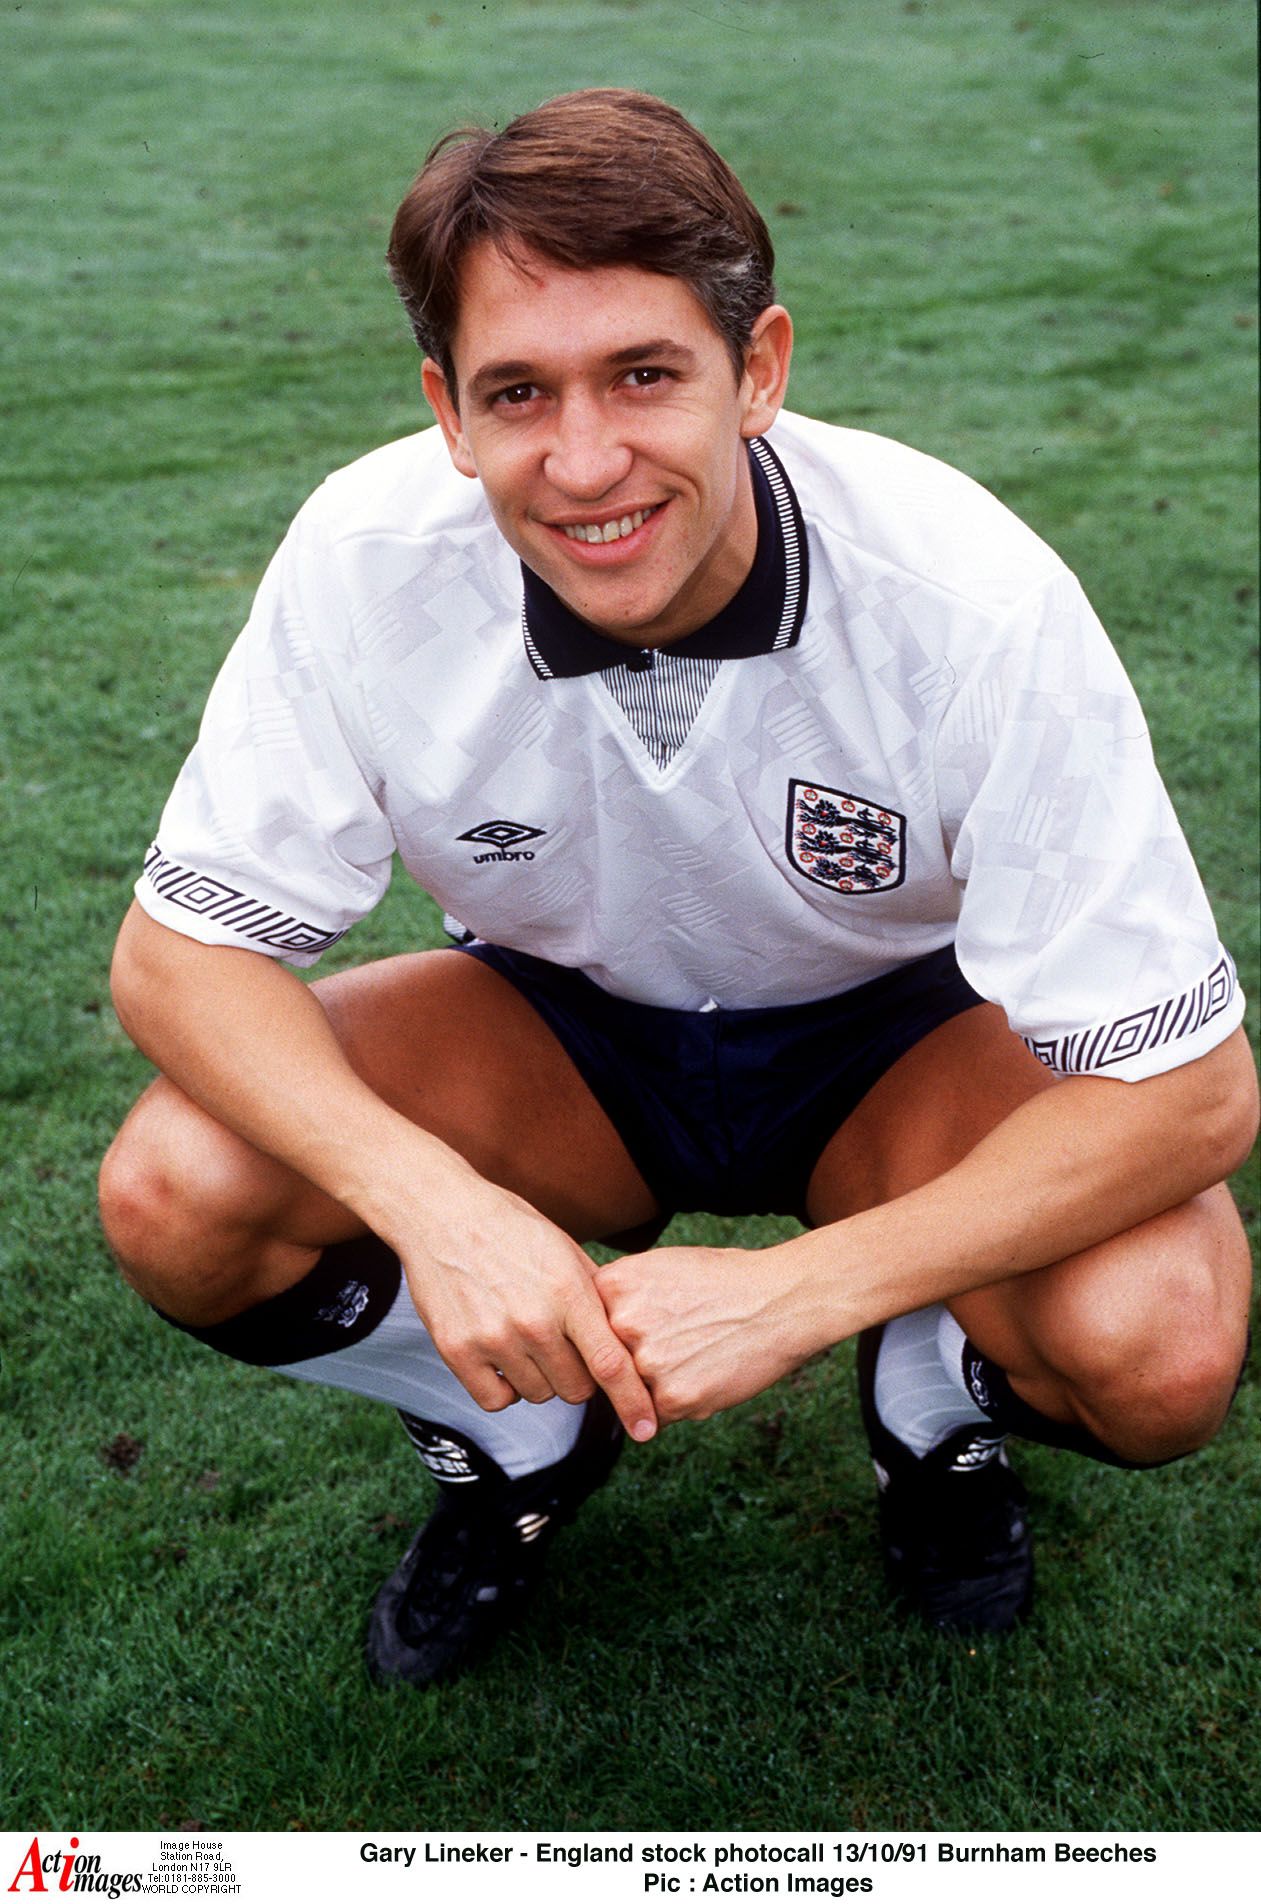 Lineker in his England days.